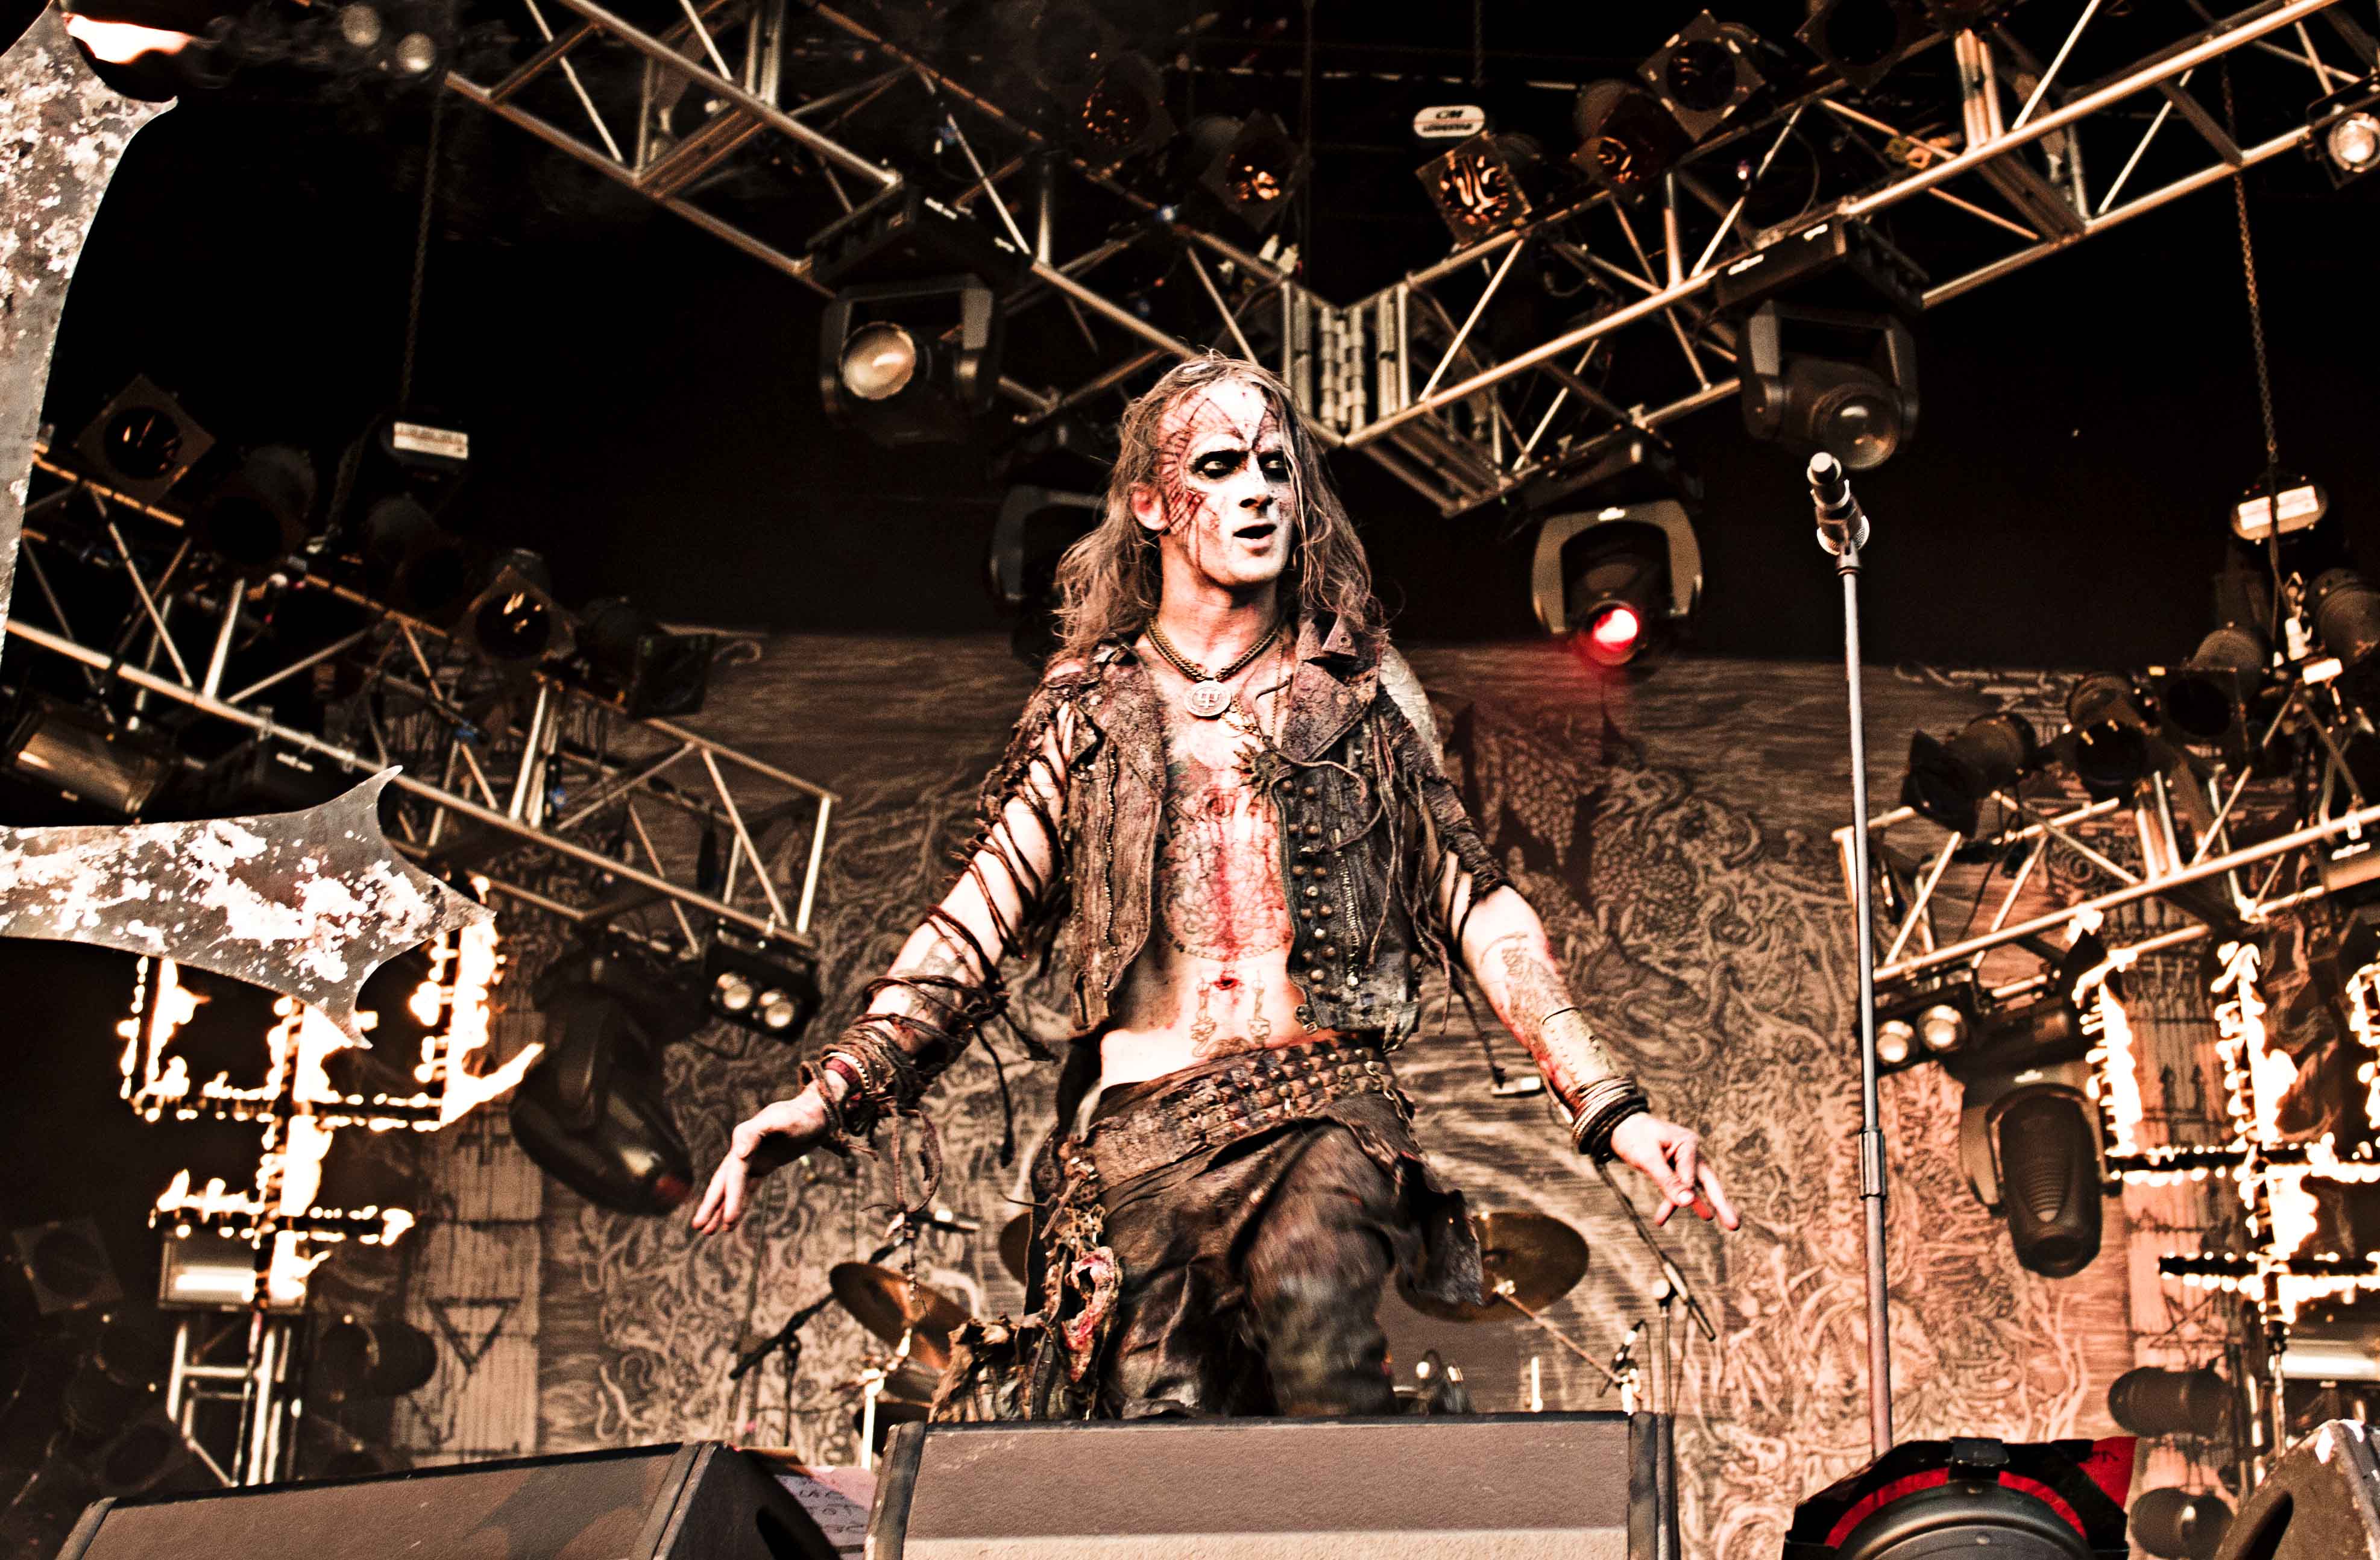 watain, Black, Metal, Heavy, Hard, Rock, Band, Bands, Group, Groups, Concert, Concerts Wallpaper